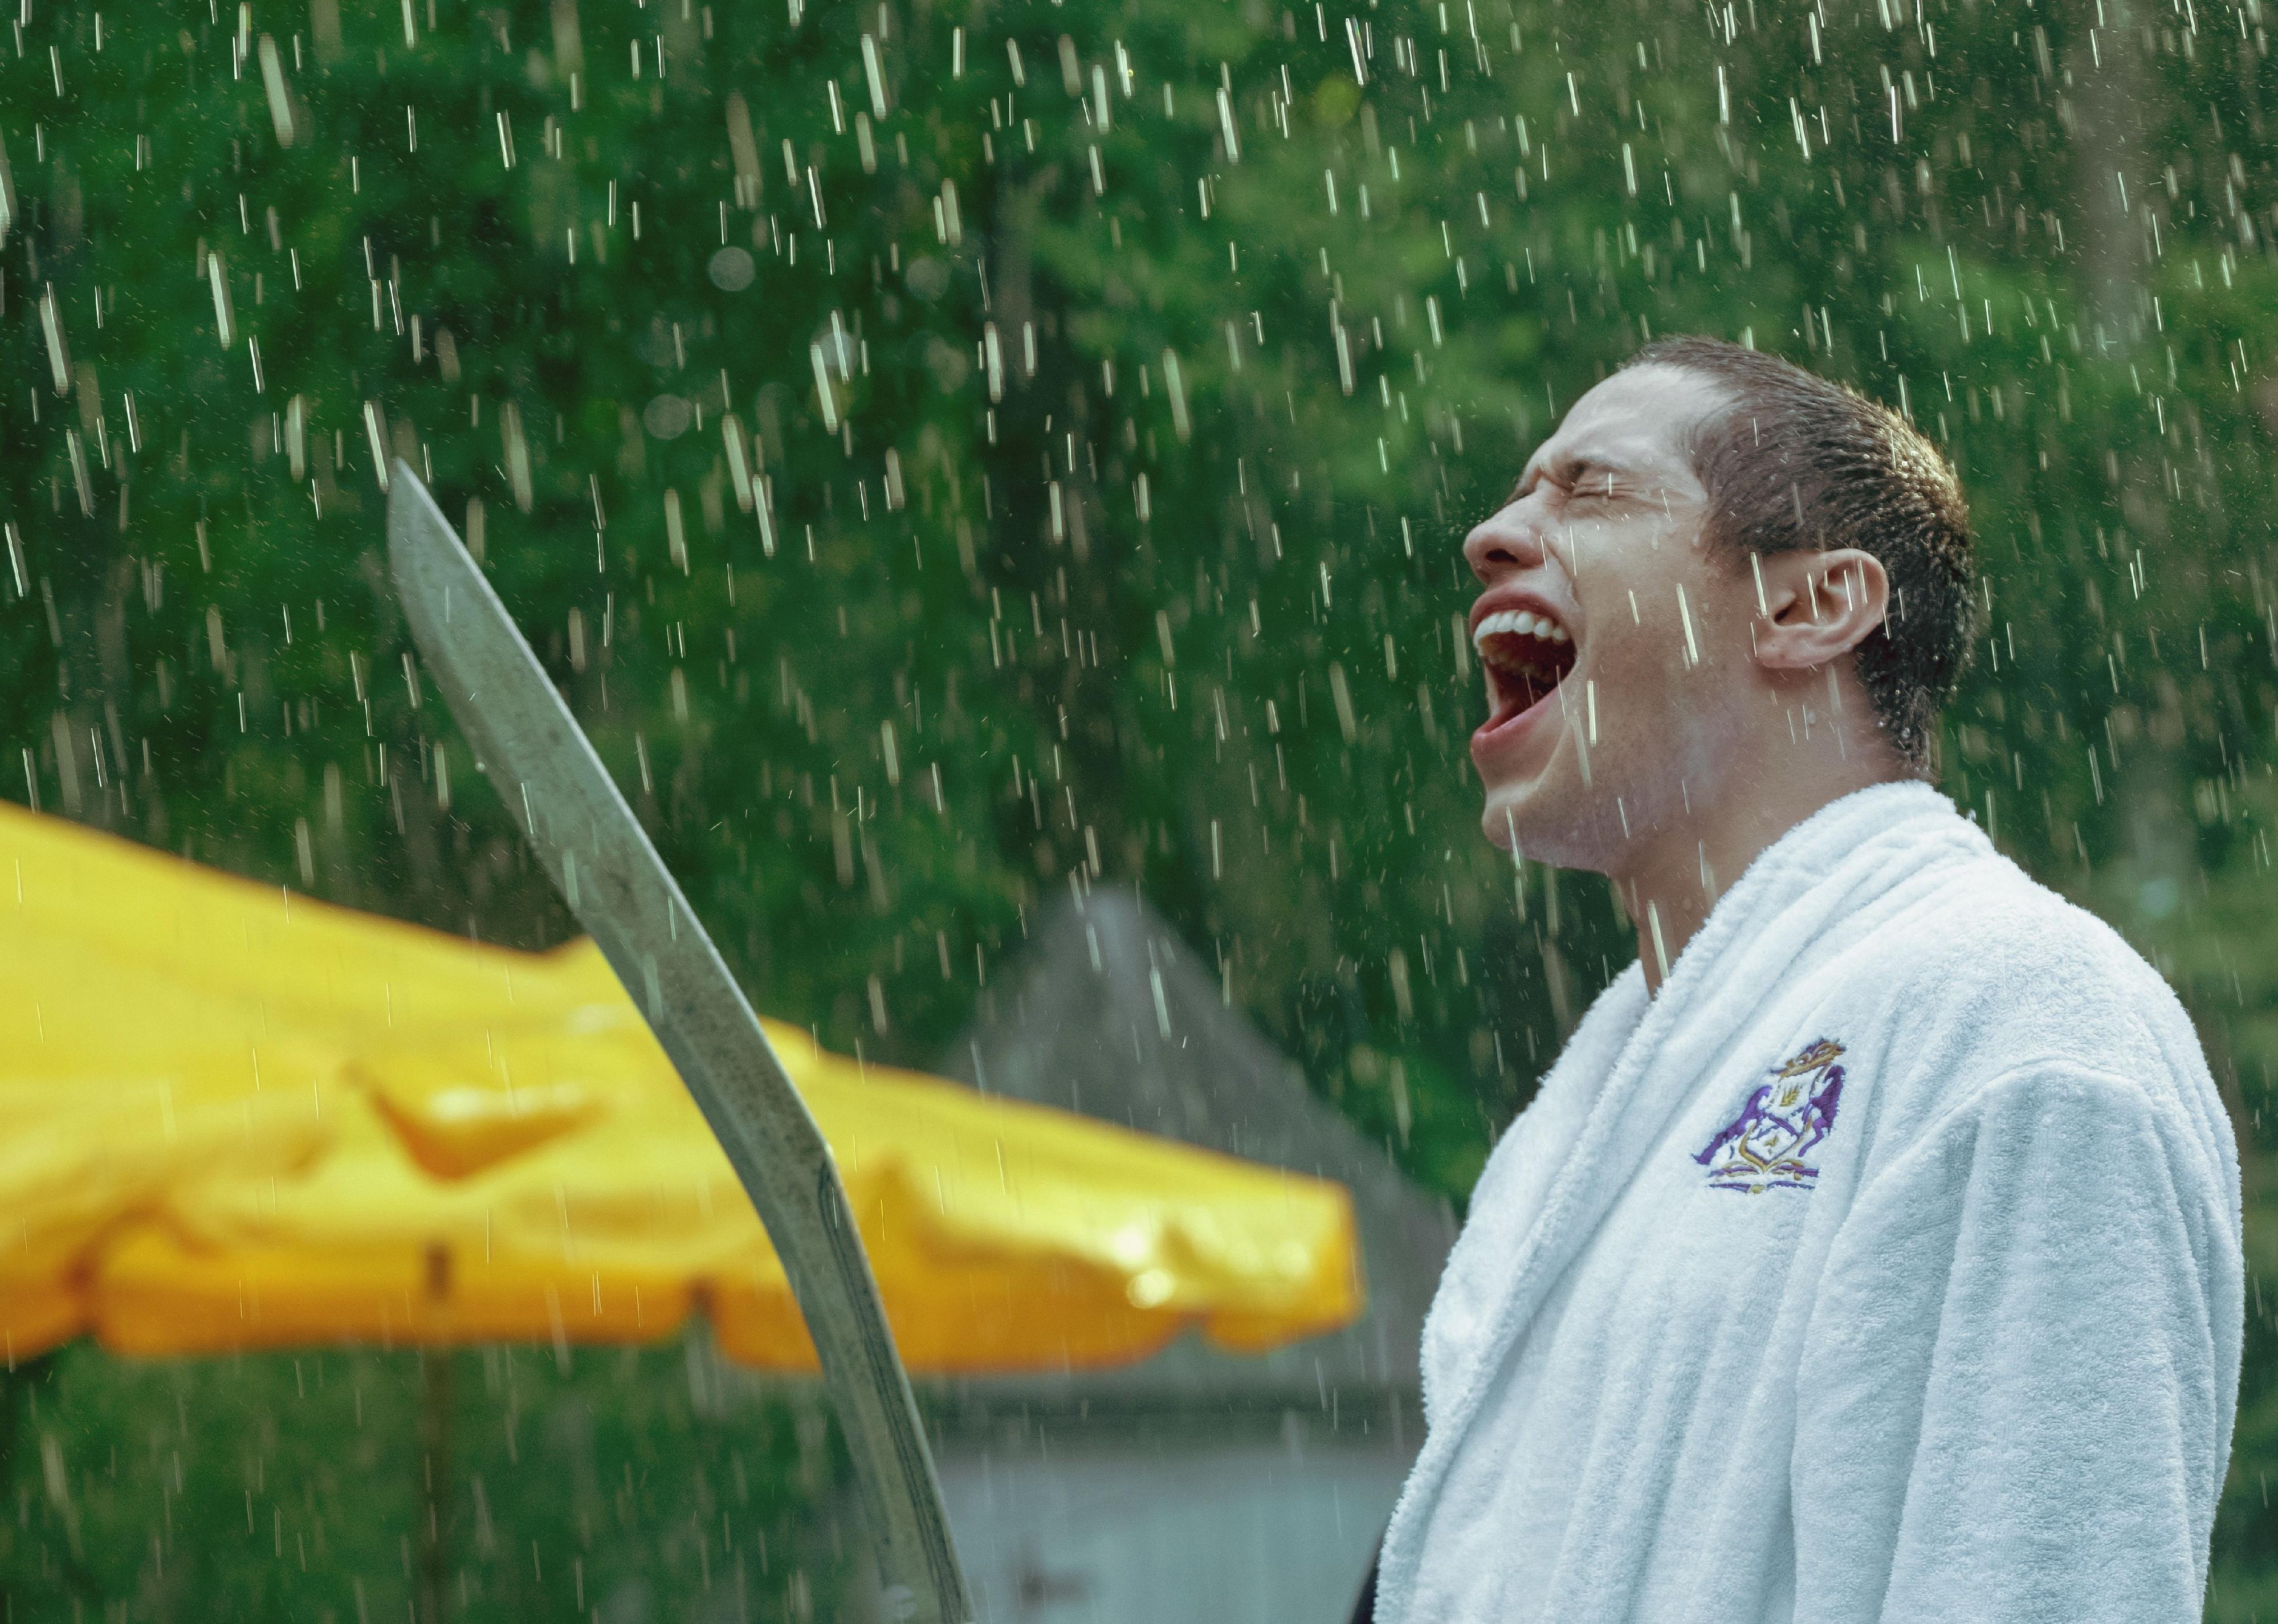 Pete Davidson wearing a robe in the rain while screaming and holding a saber